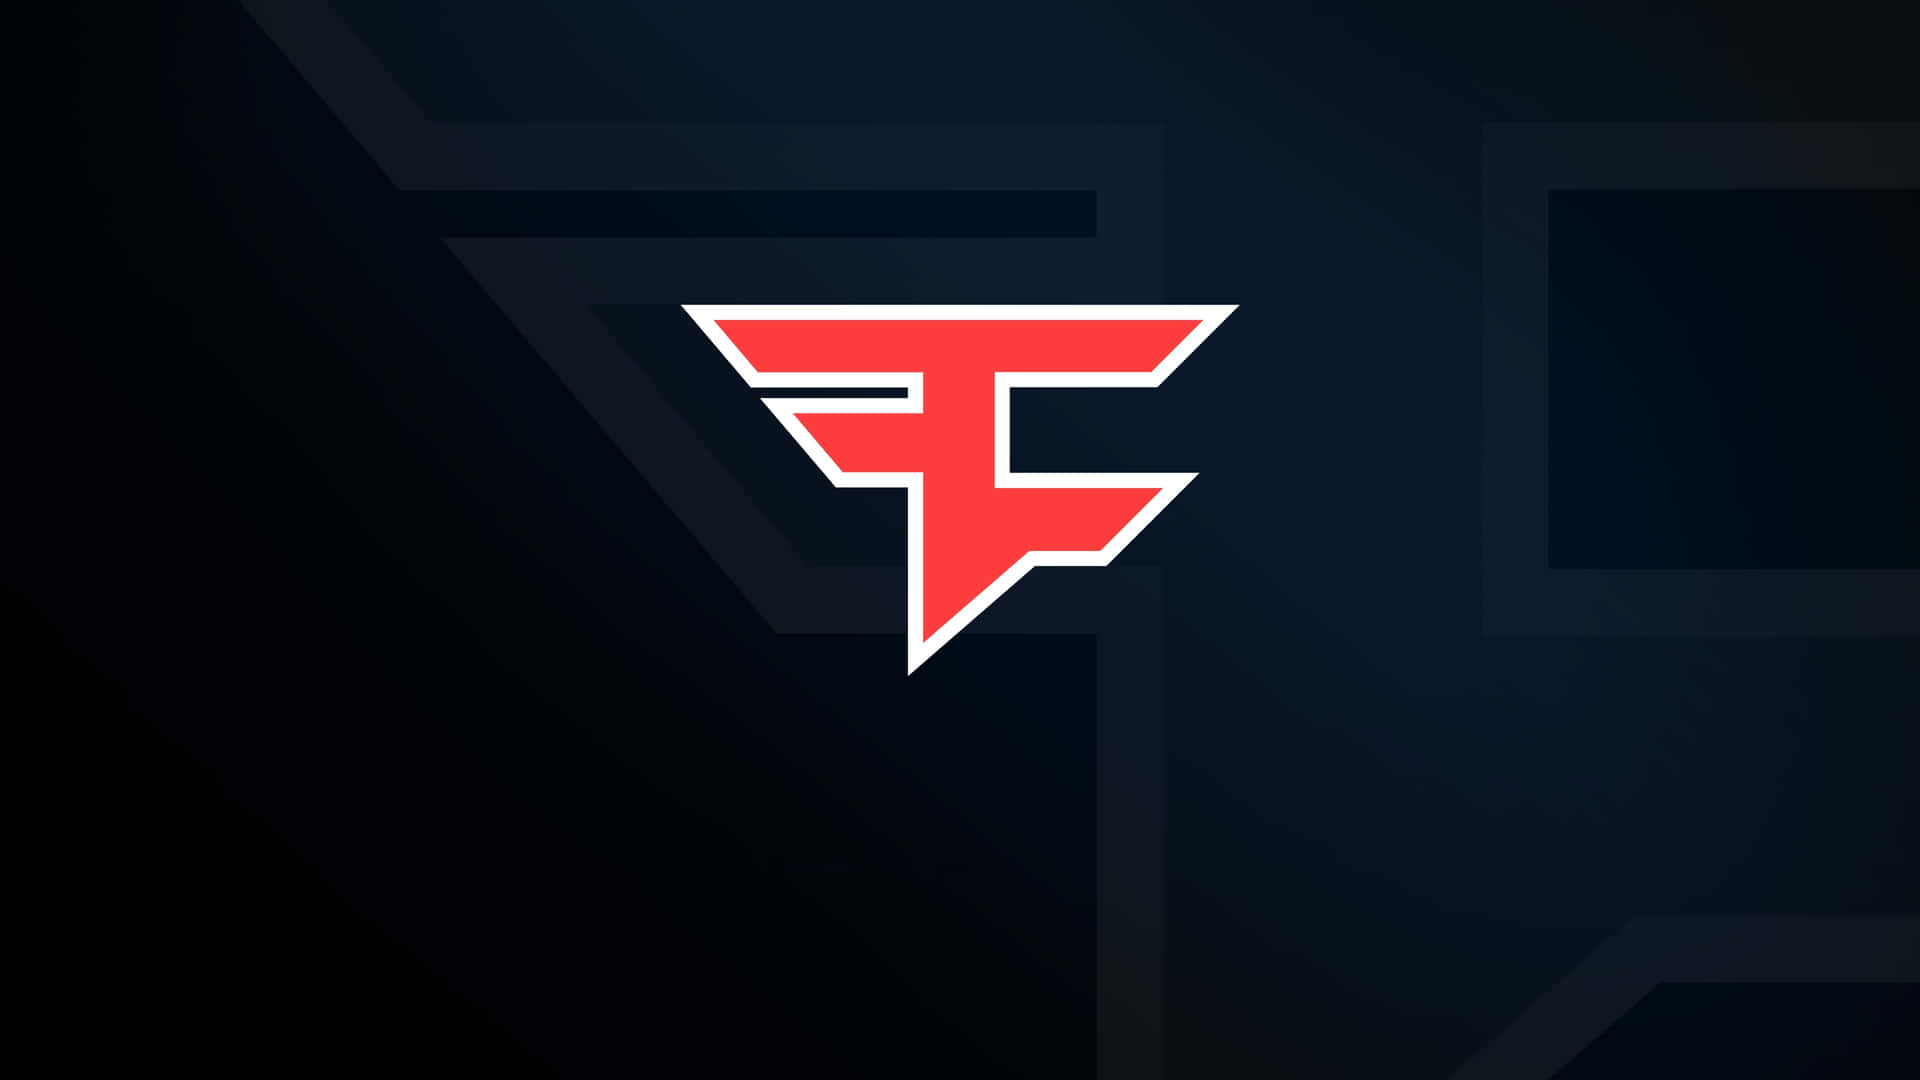 Faze Rug - The Master Of Social Gaming Background